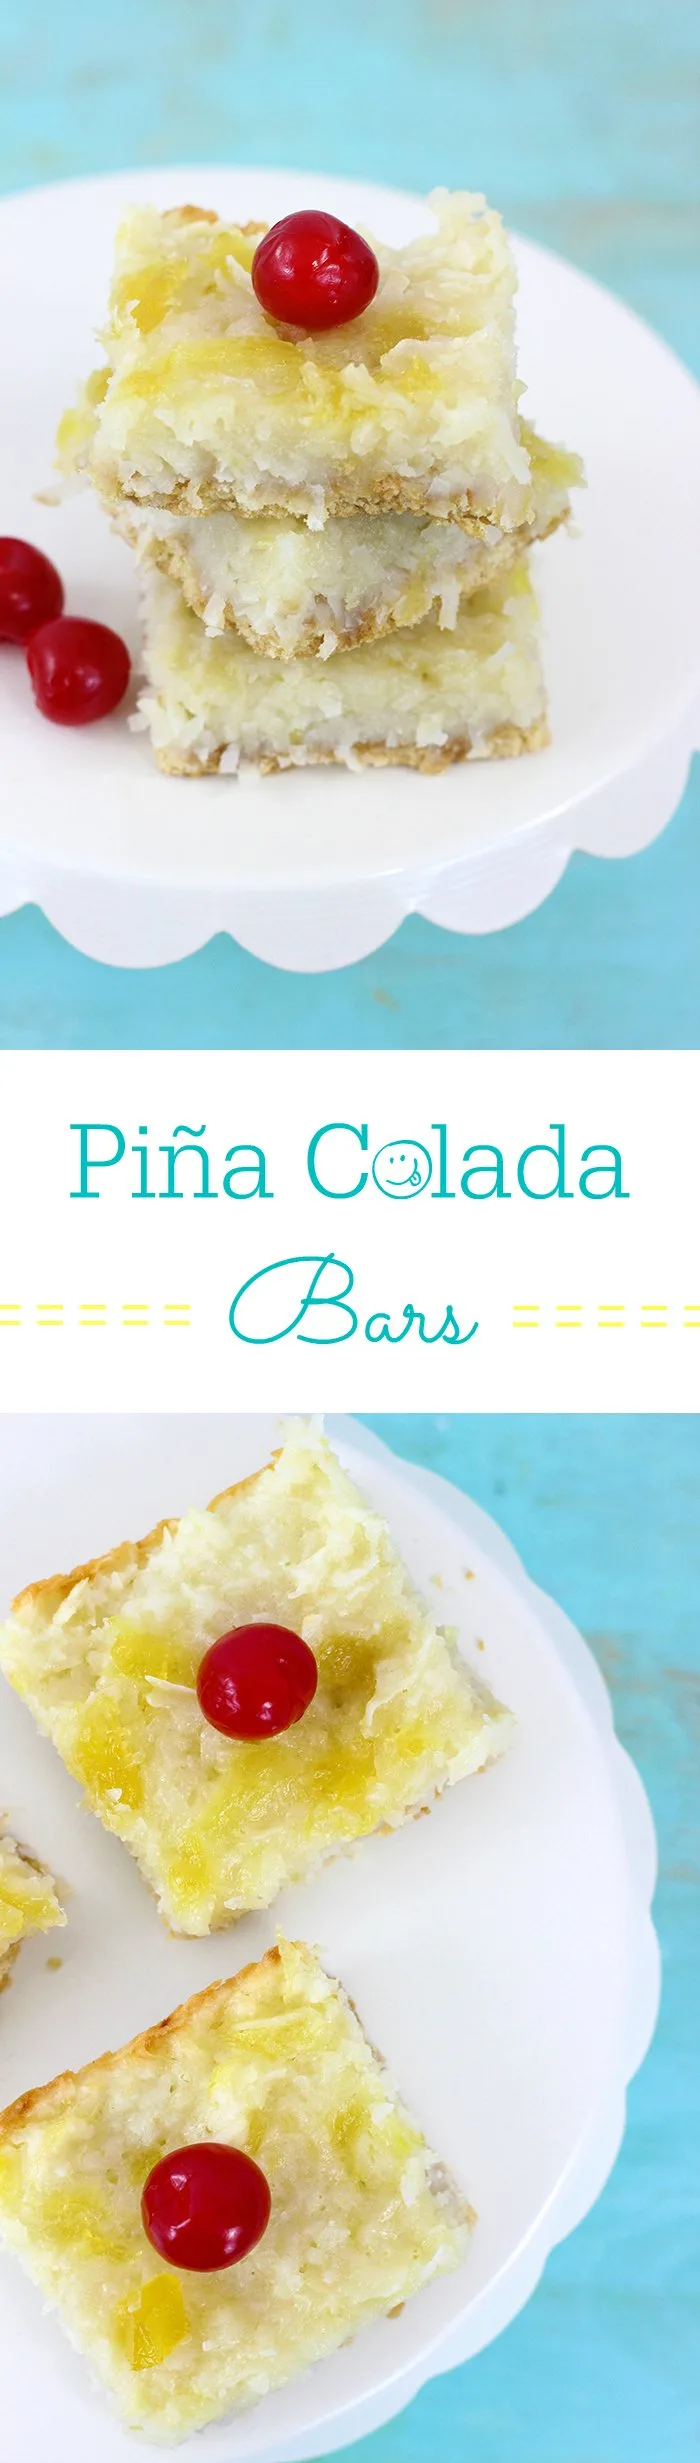 Piña Colada Bars Recipe. Coconut and Pineapple come together in the most amazing way in this super easy bar recipe. Get in my belly!